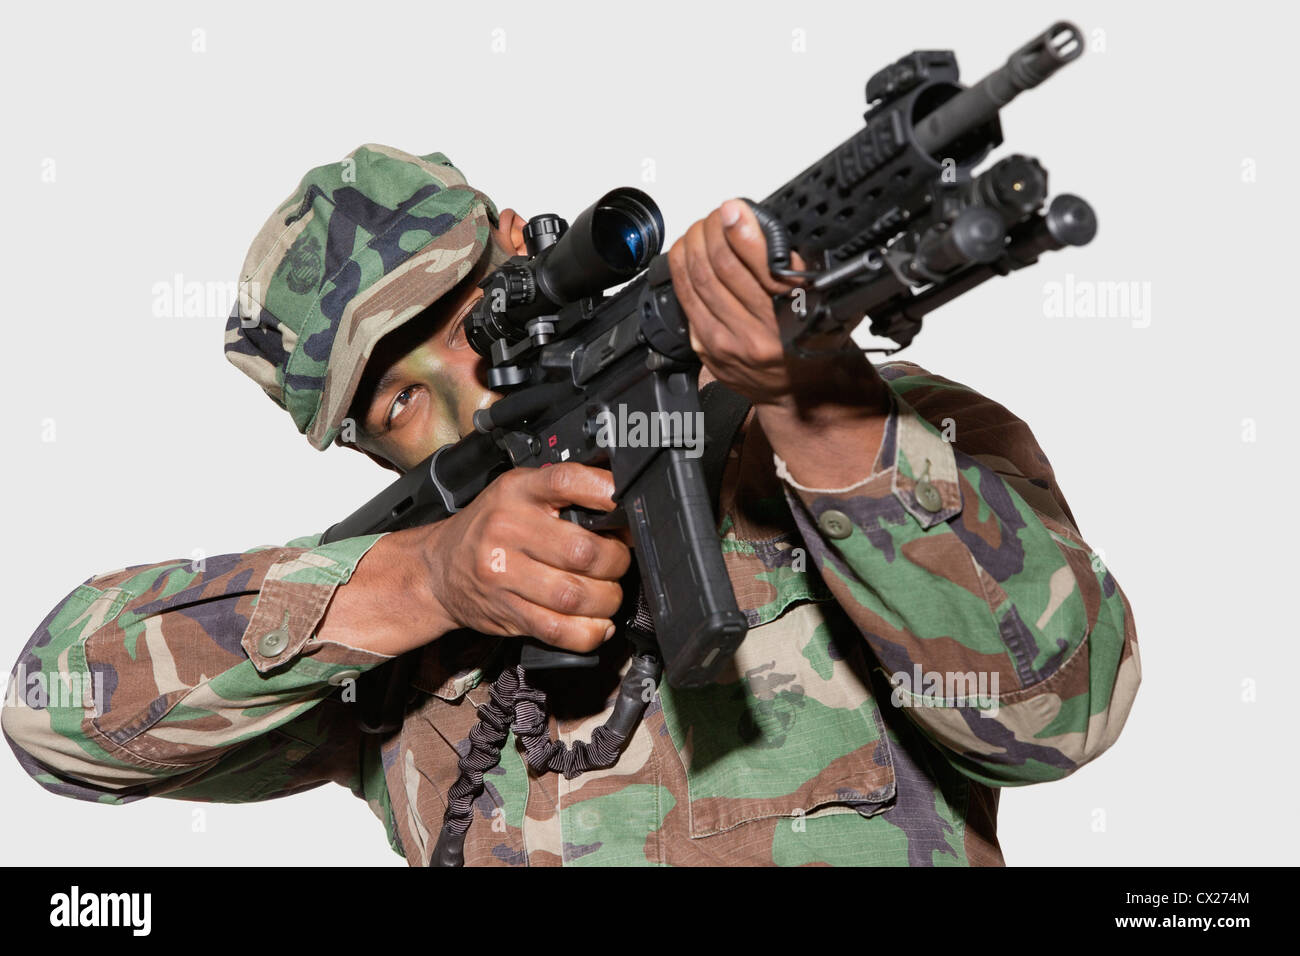 US Marine Corps soldier aiming M4 assault rifle against gray background Stock Photo